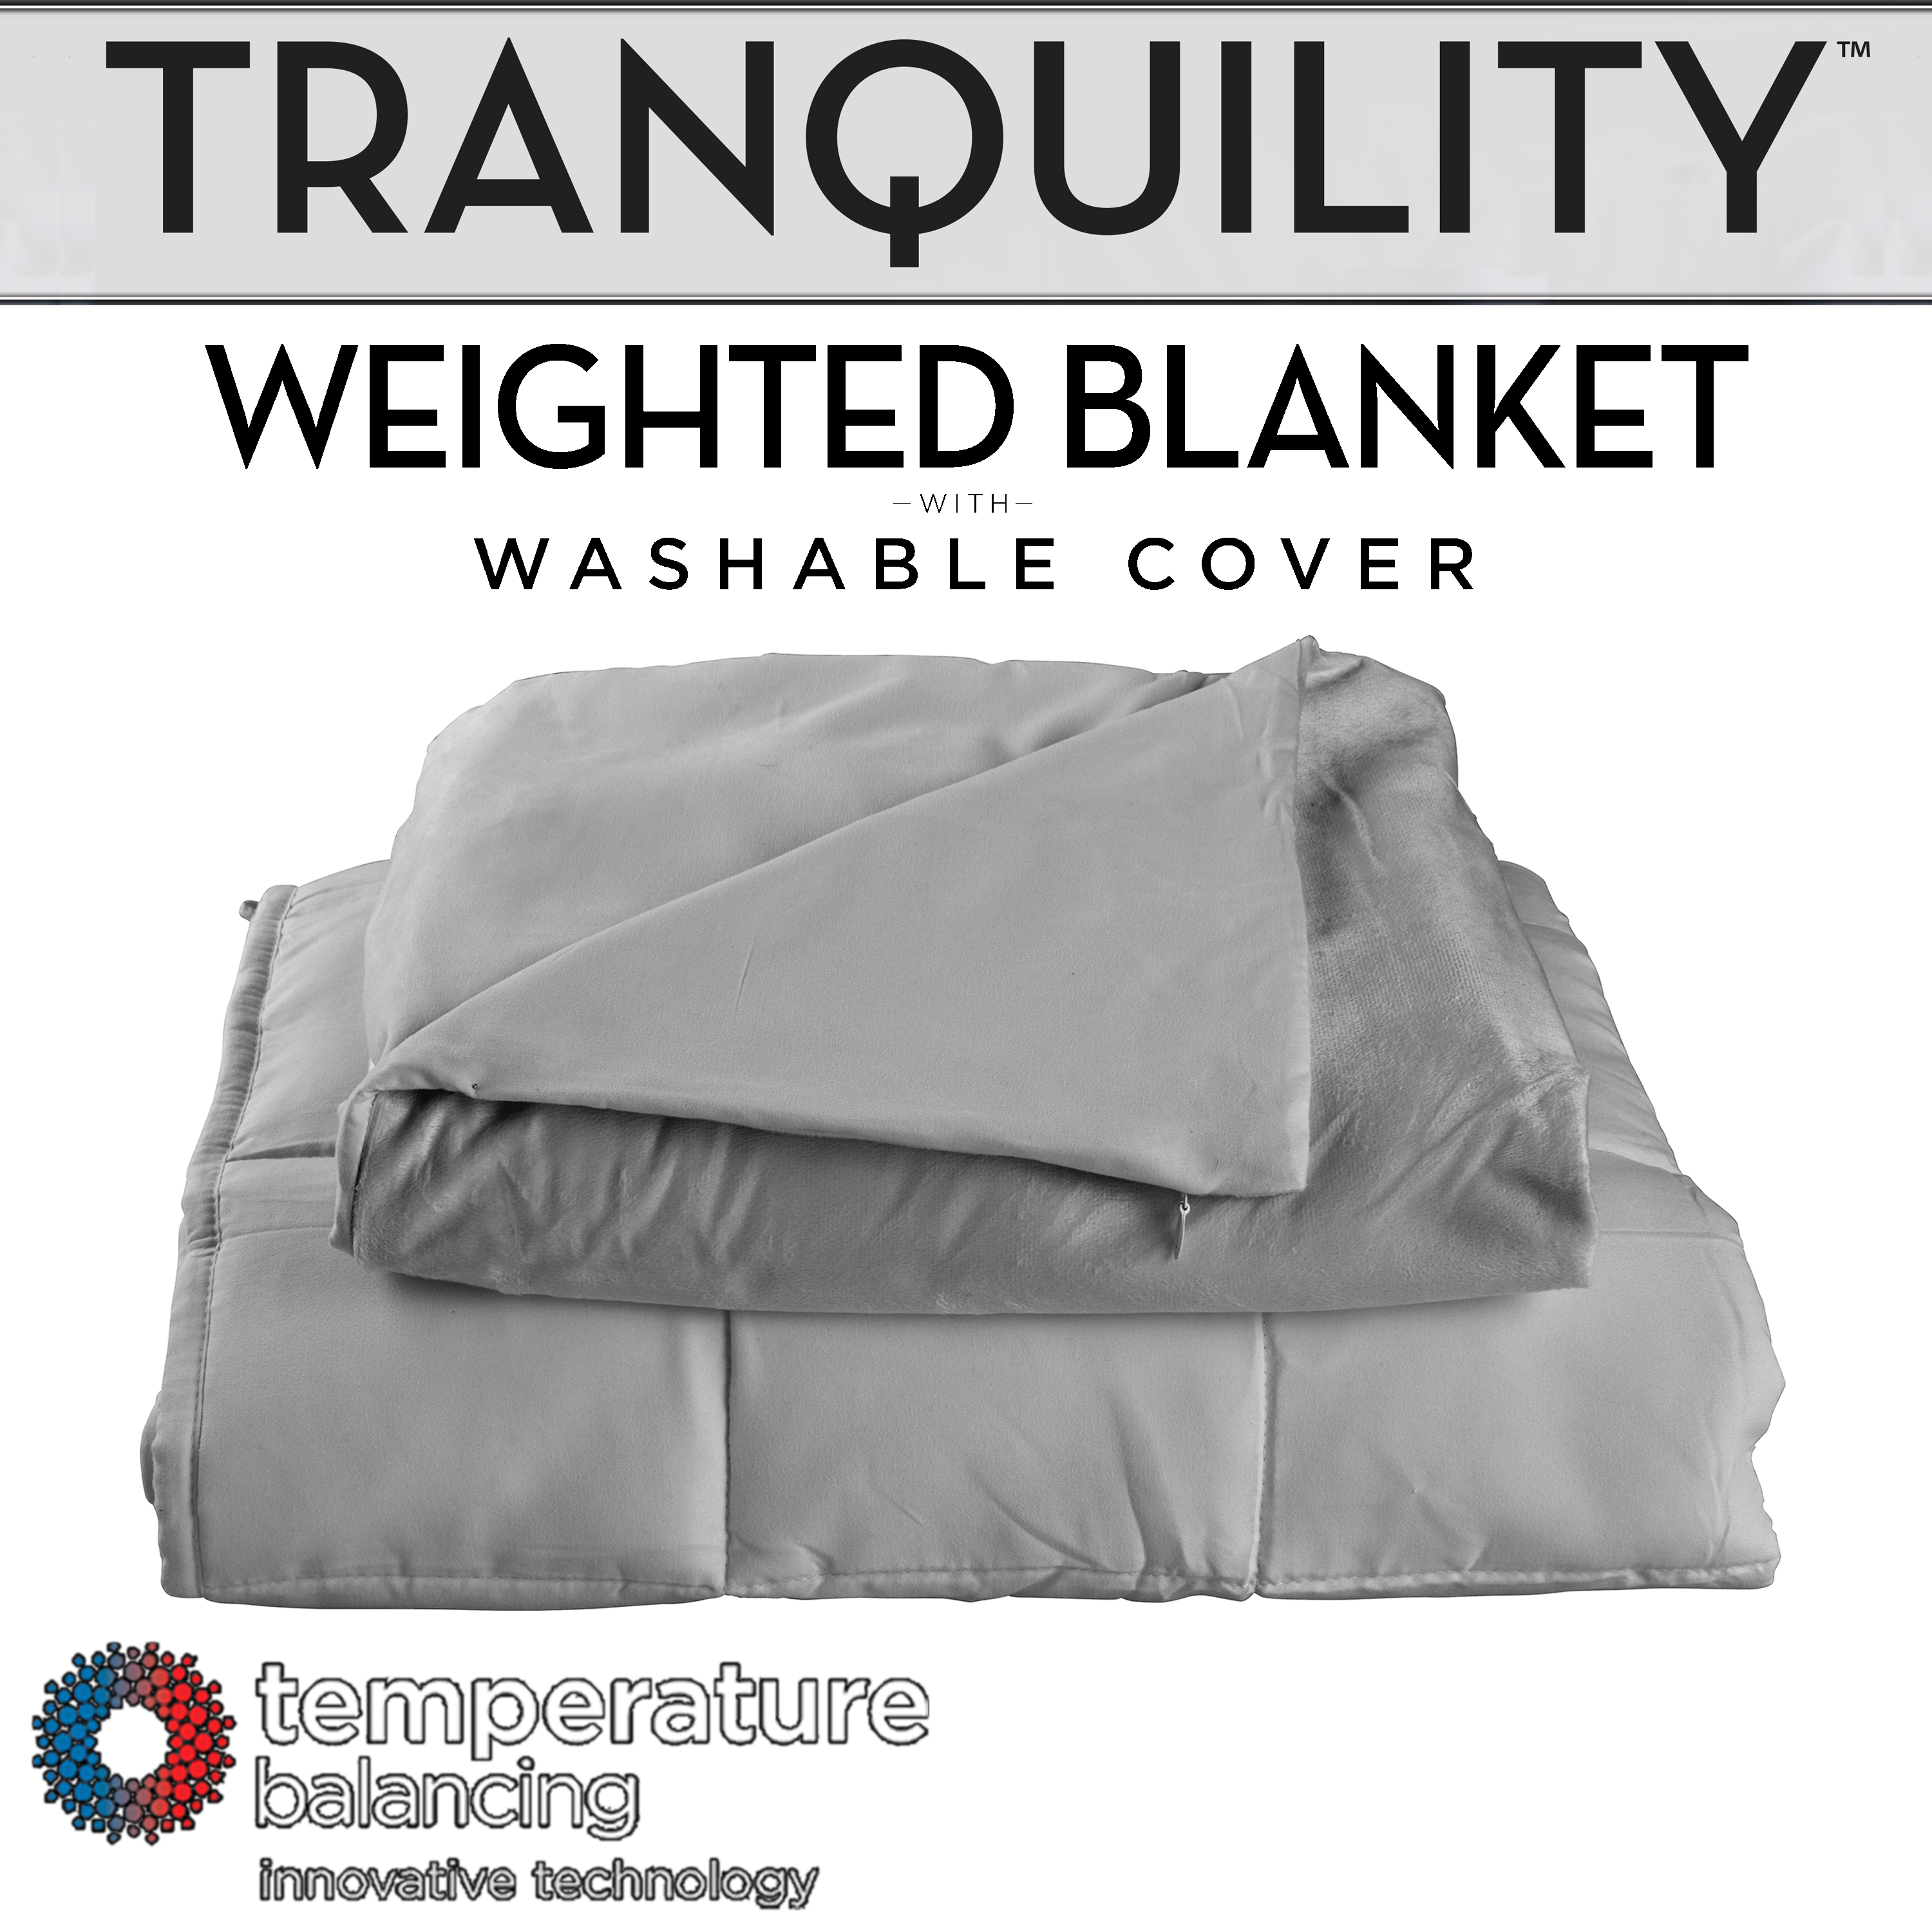 Tranquility Temperature Balancing Weighted Blanket with Washable Cover, 20 lbs - image 5 of 9